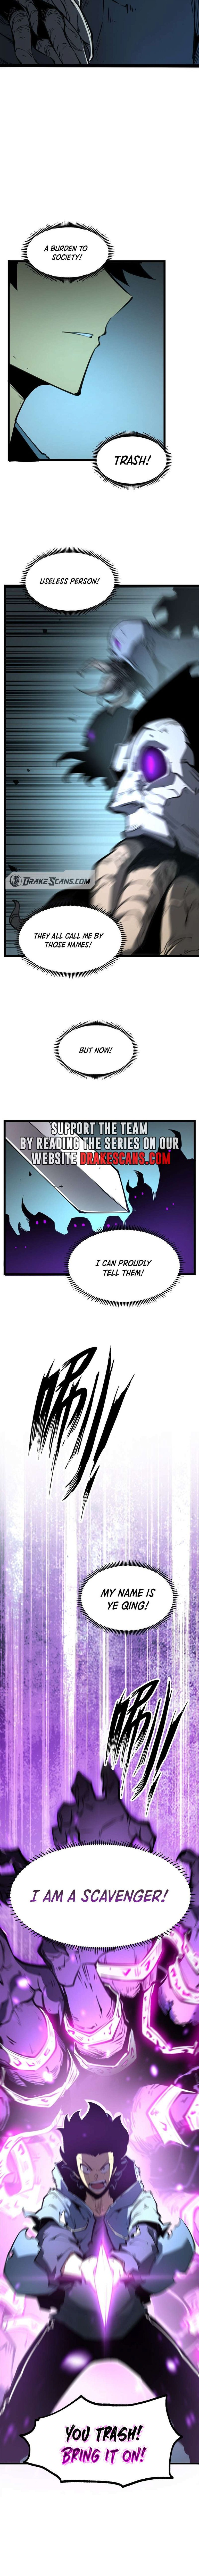 I Became The King by Scavenging Chapter 3 page 17